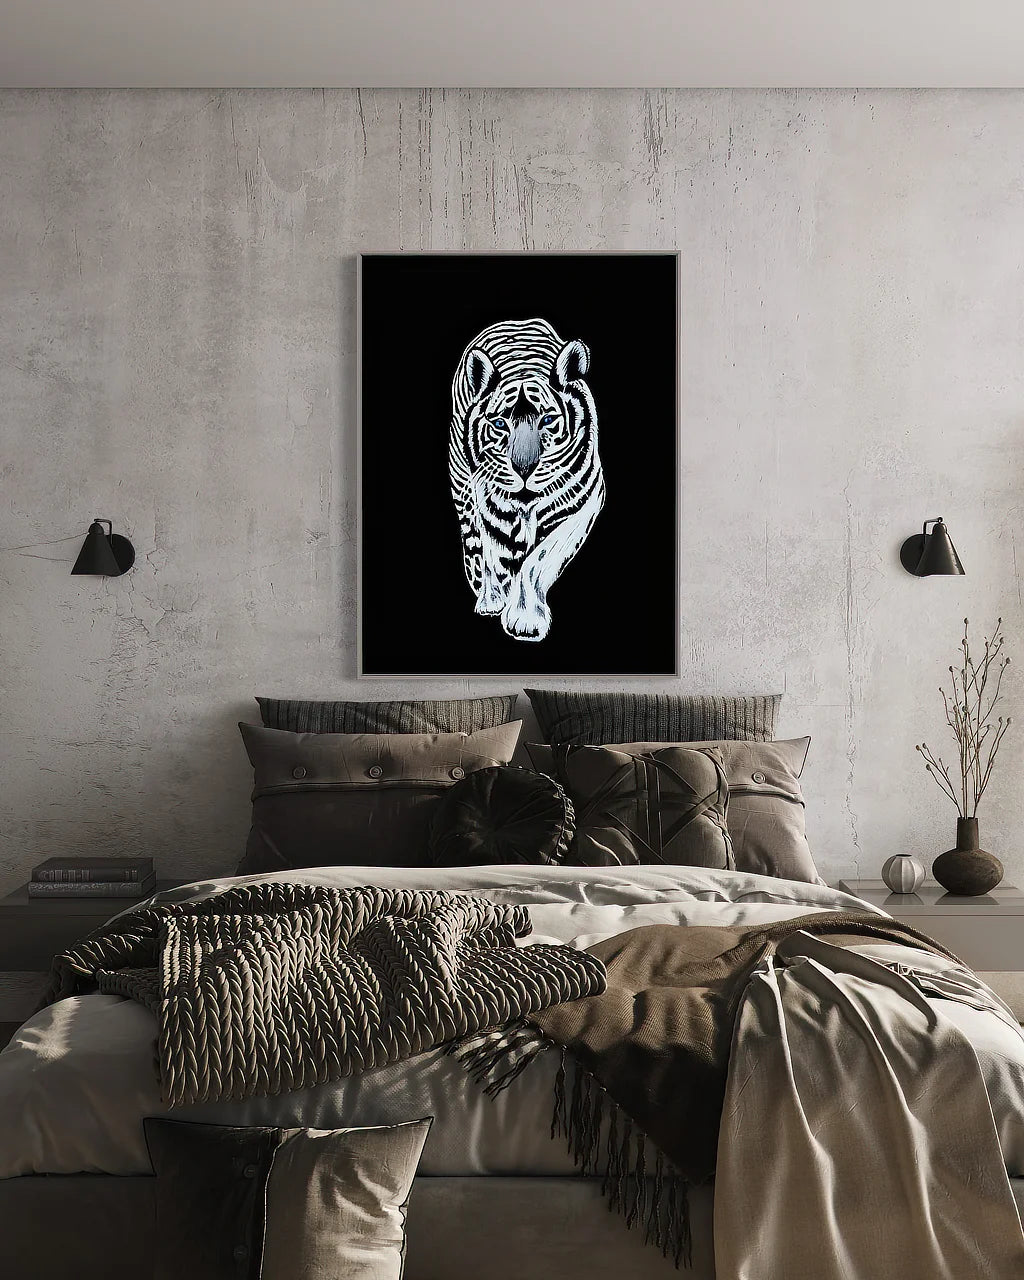 White Siberian tiger print by Sonia Malboeuf on wall in bedroom